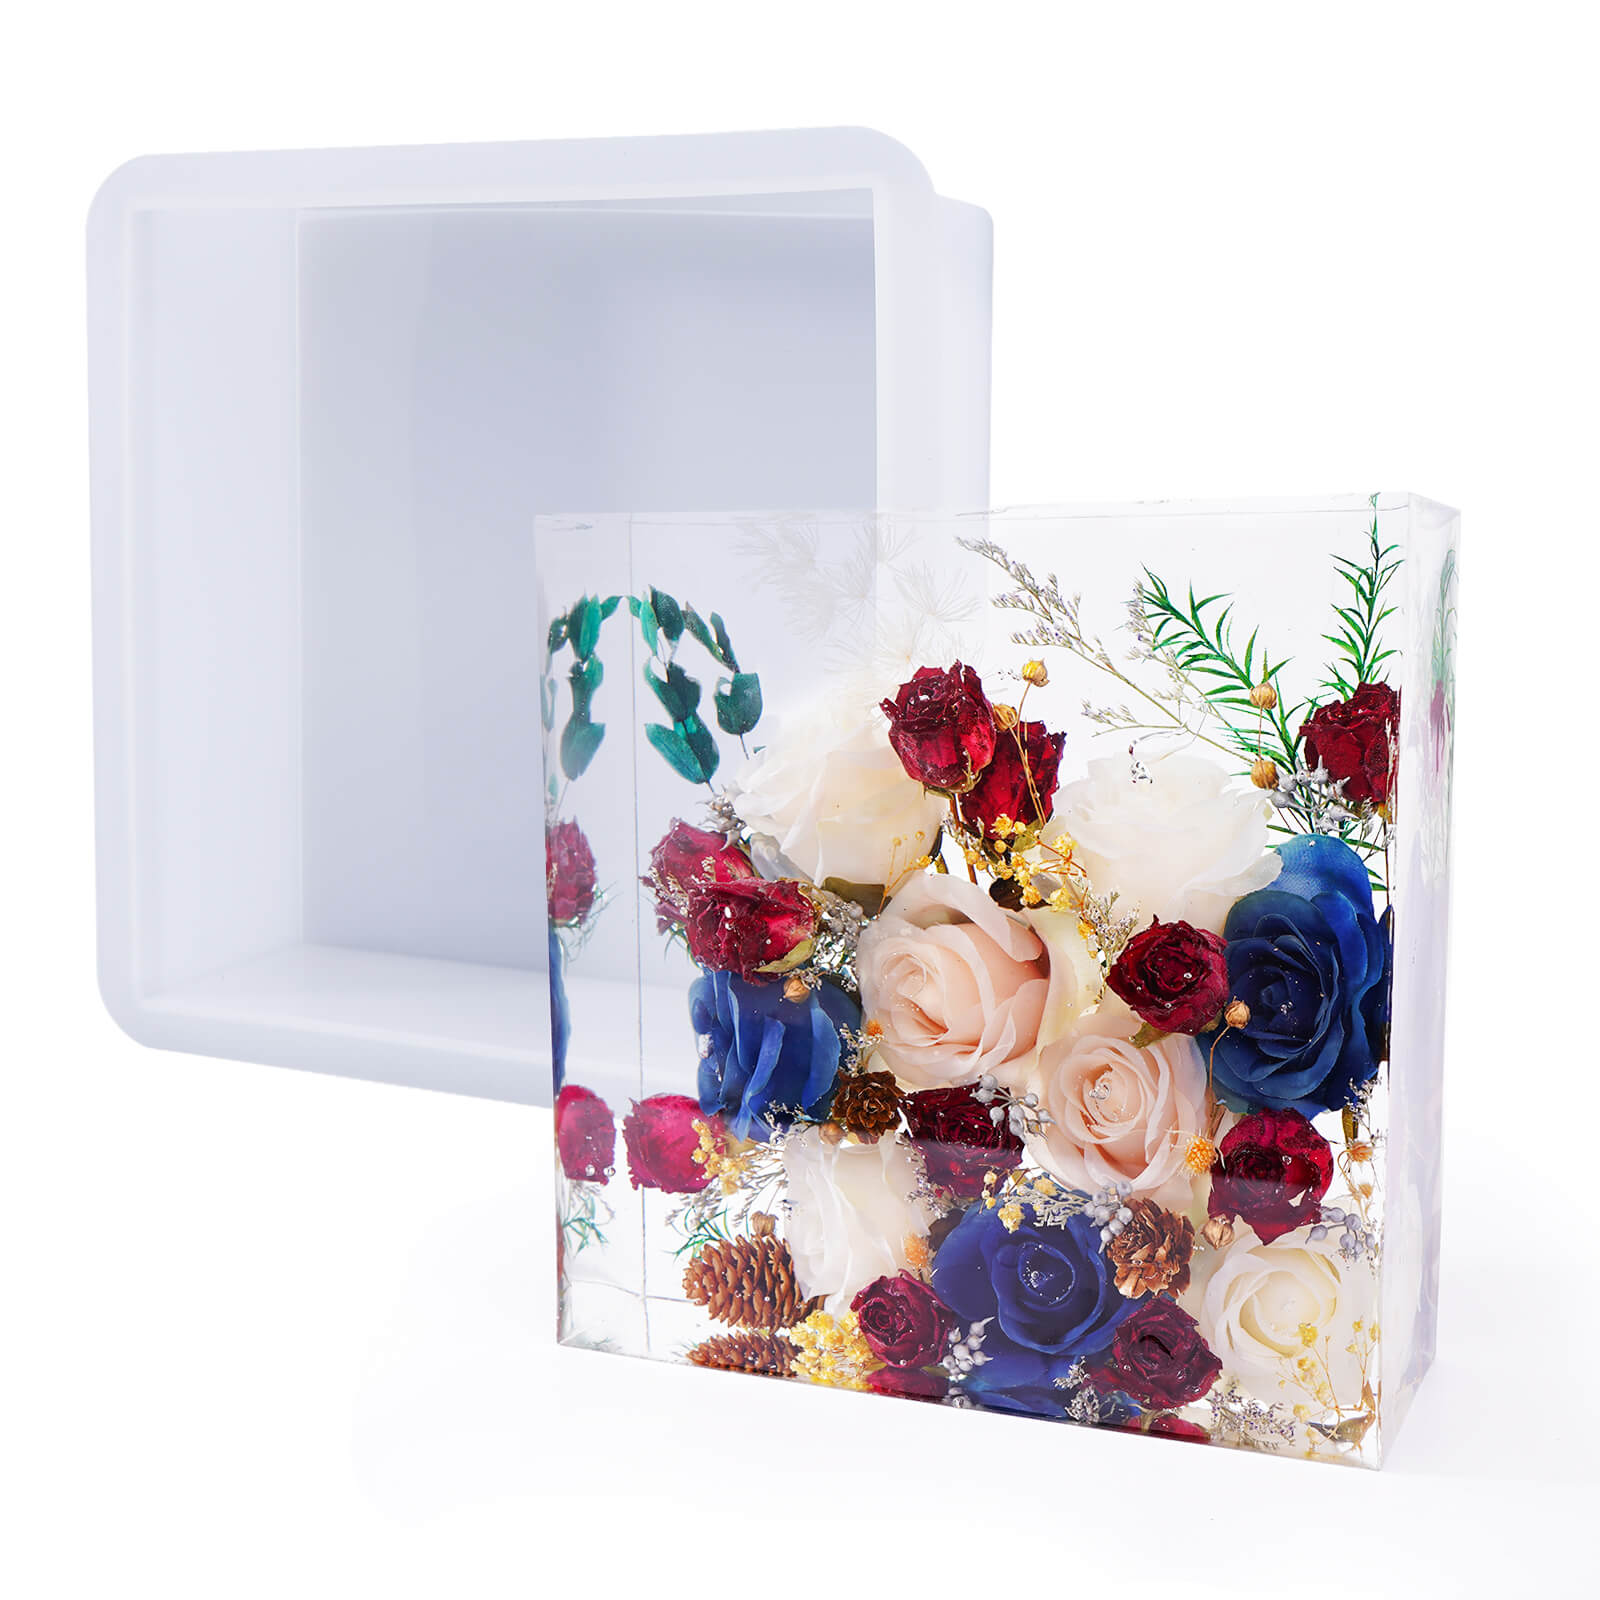 Let's Resin How to Get a Decorative Flower Mirror with UV Resin, flower